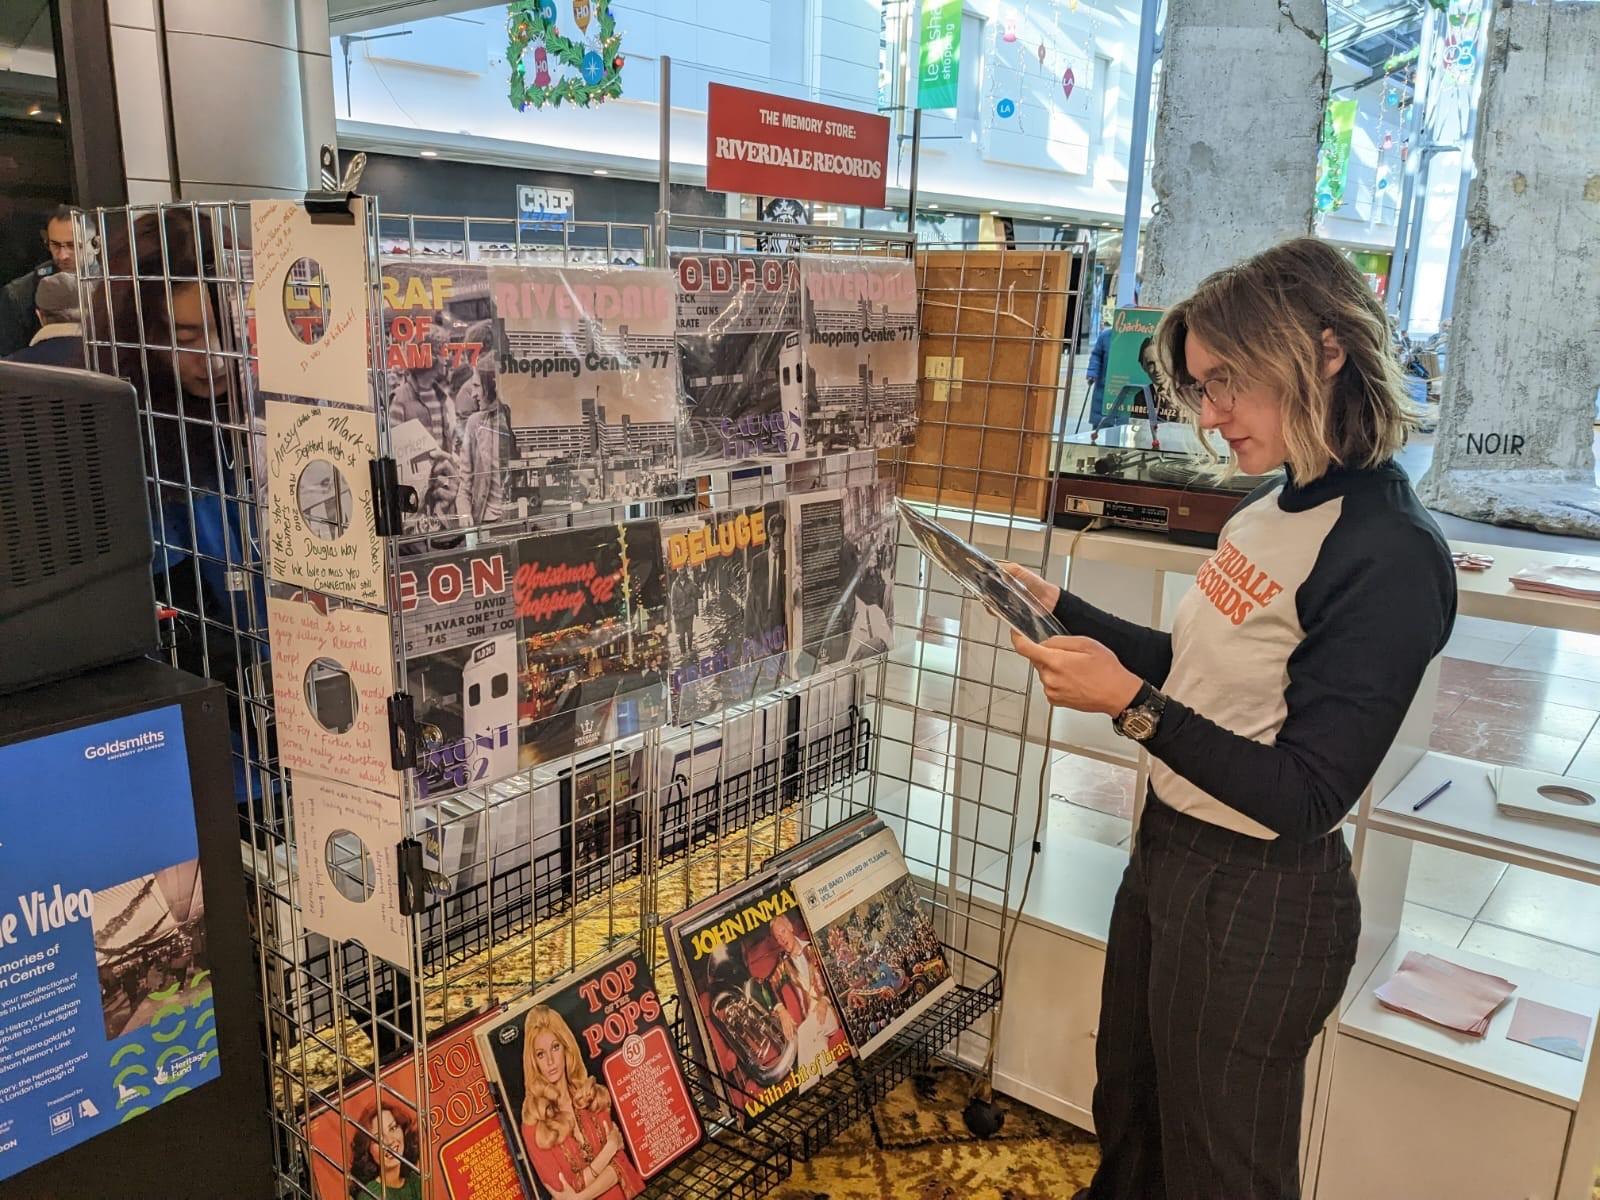 A woman explores an installation of a record store. She is holding and reading the back of a record.